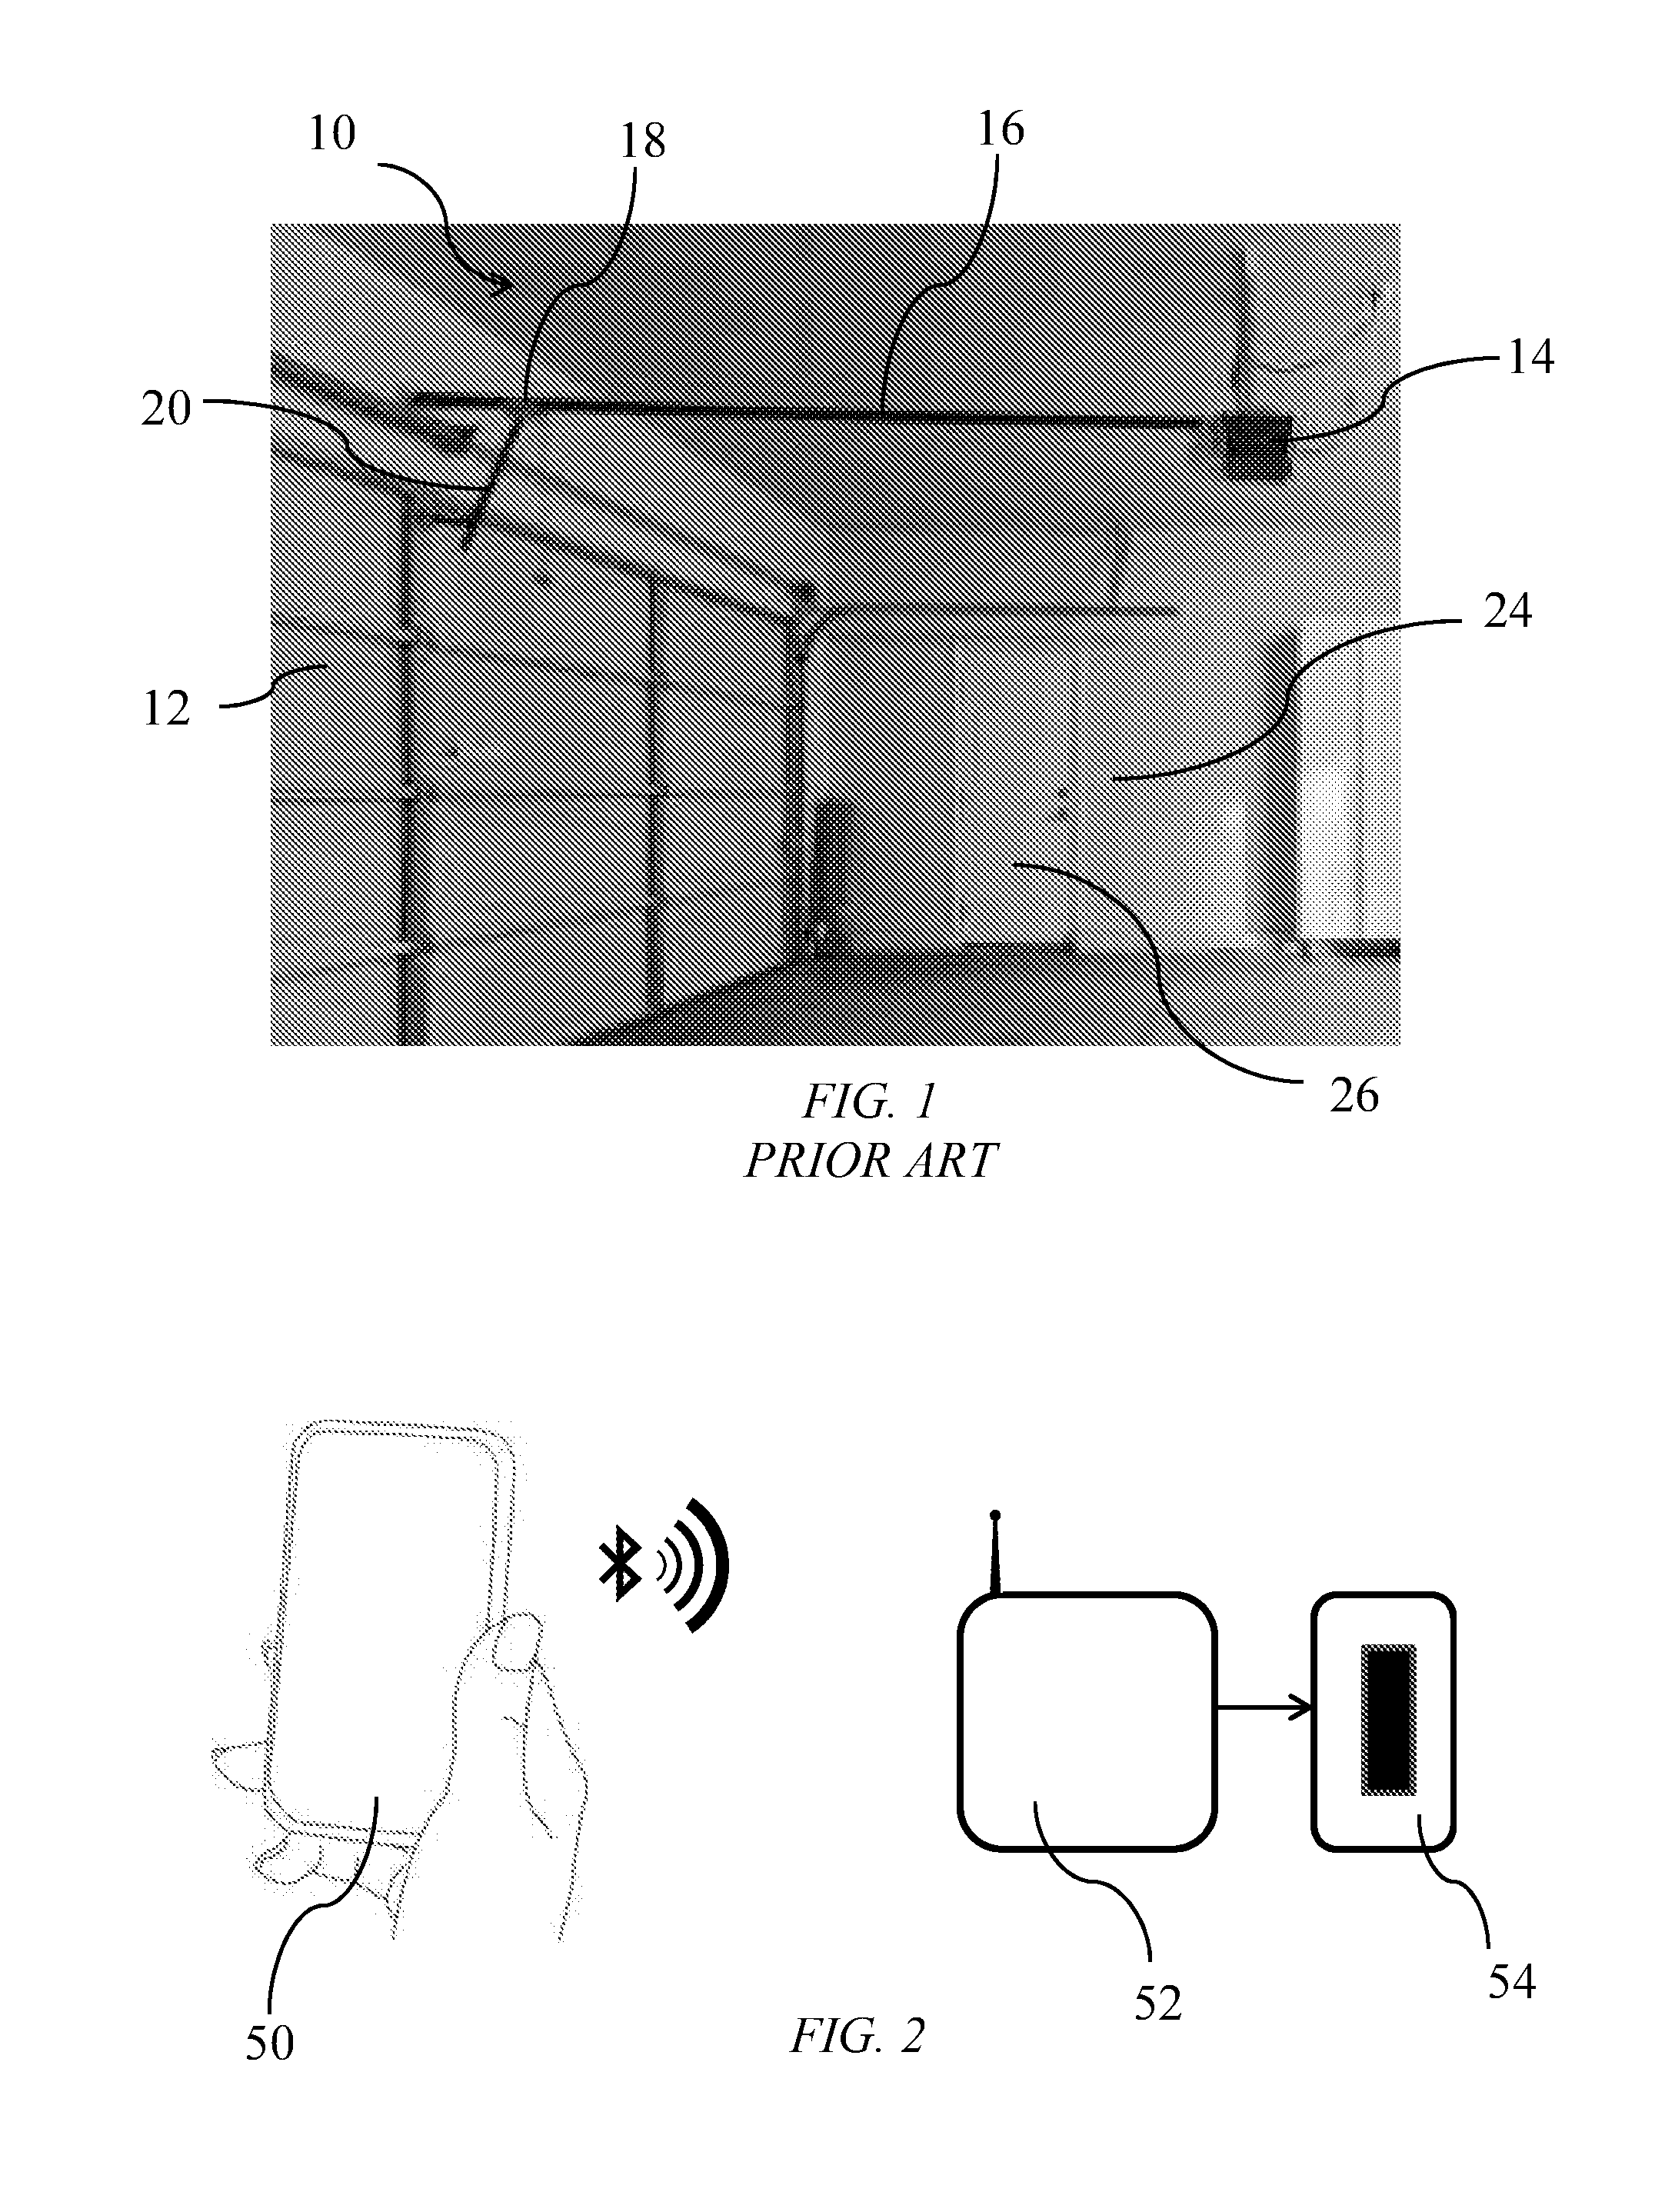 Automatic Wireless Door Opening System and Method of Using the Same